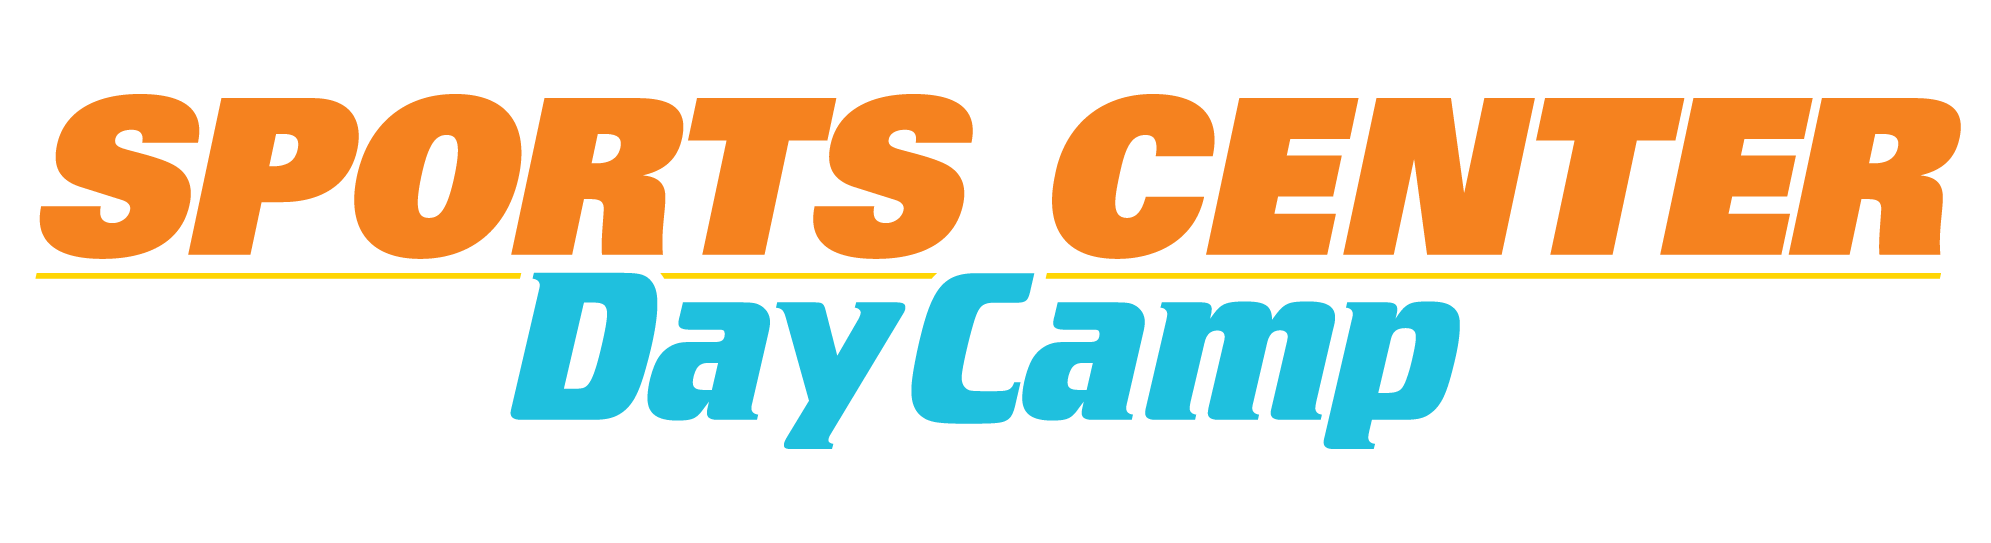 Sports Center Day Camp